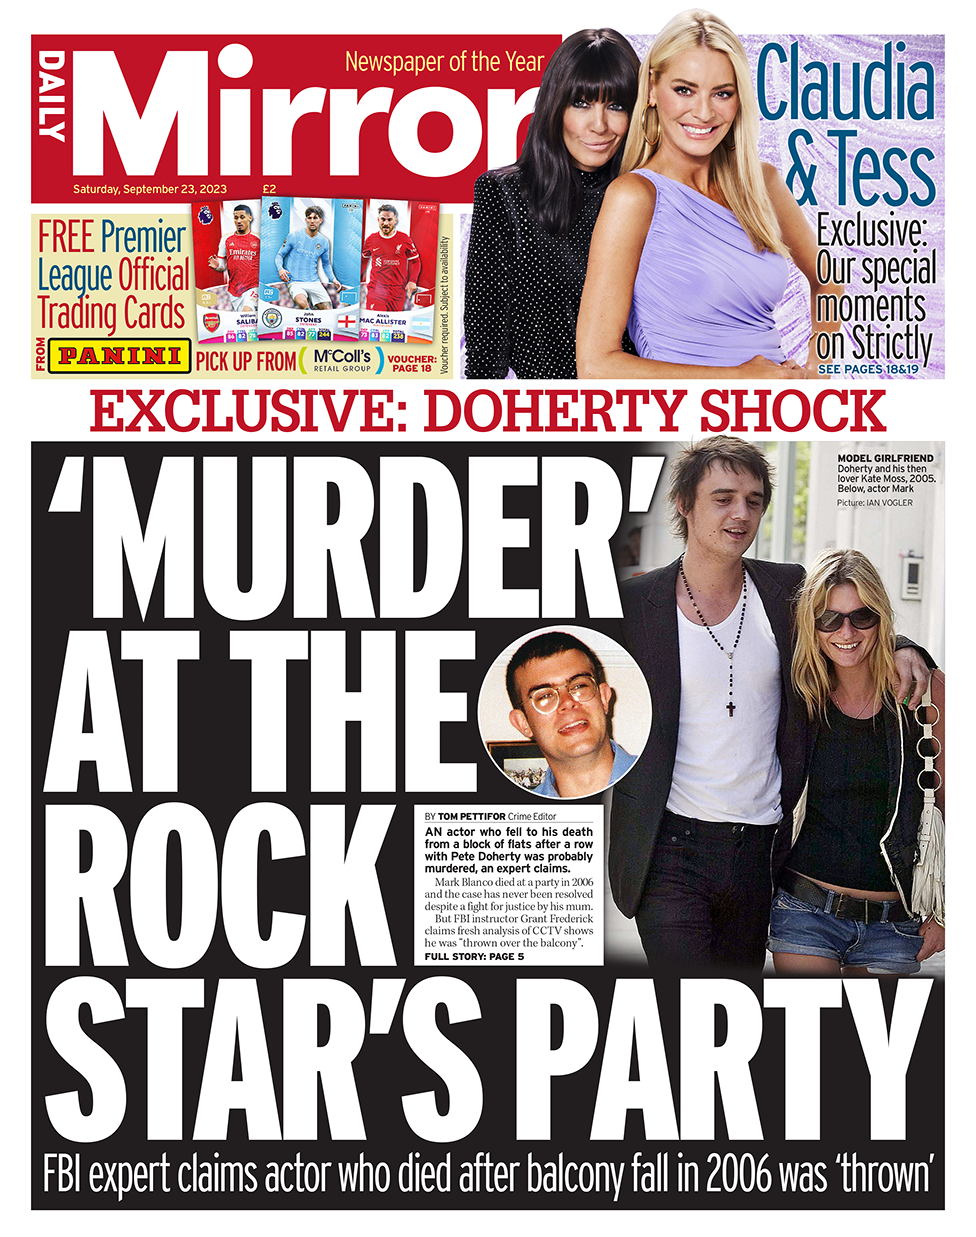 Daily Mirror - 23/09/23